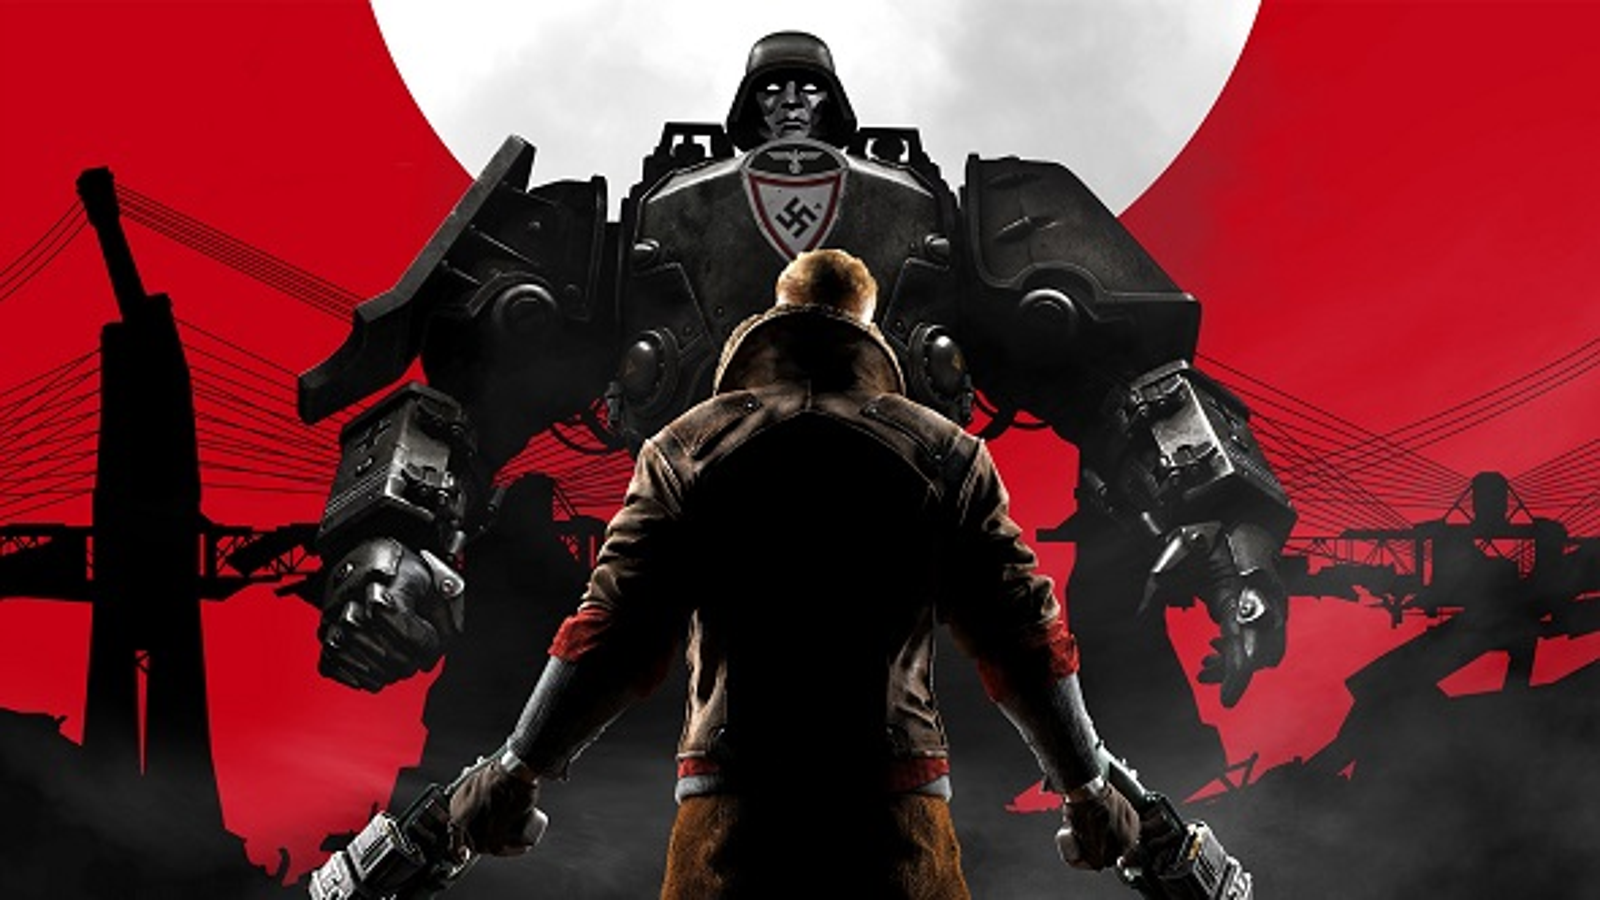 Wolfenstein: The New Order battles evil Nazis but can't fight off middling  reviews